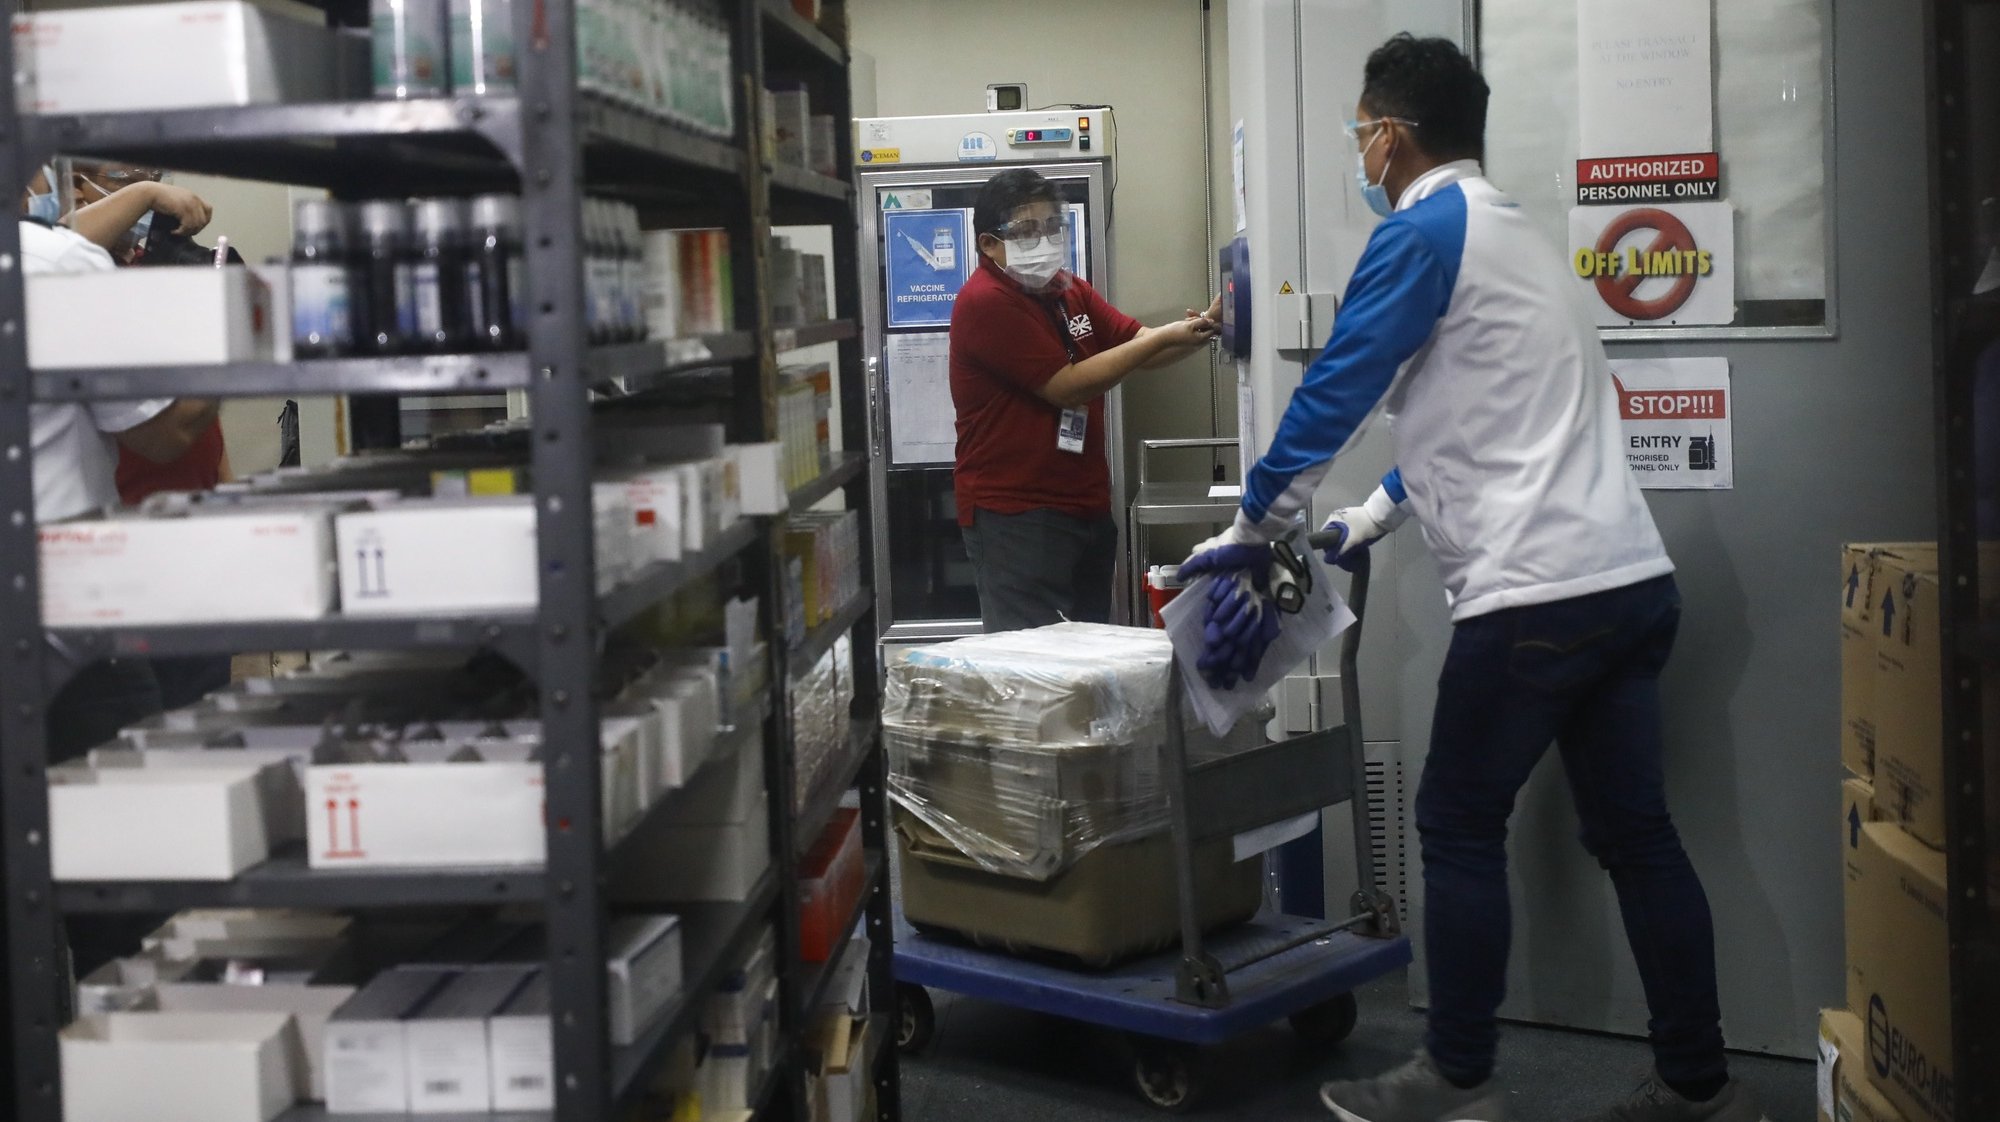 epa08998093 A worker (R) delivering a mock batch of COVID-19 vaccine enters a pharmacy during a vaccine delivery drill at the Lung Center of the Philippines medical facility in Quezon City, Metro Manila, Philippines, 09 February 2020. The Philippines health department supervised the delivery and vaccination drill to ensure the vaccine is properly handled once available in the country.  EPA/ROLEX DELA PENA